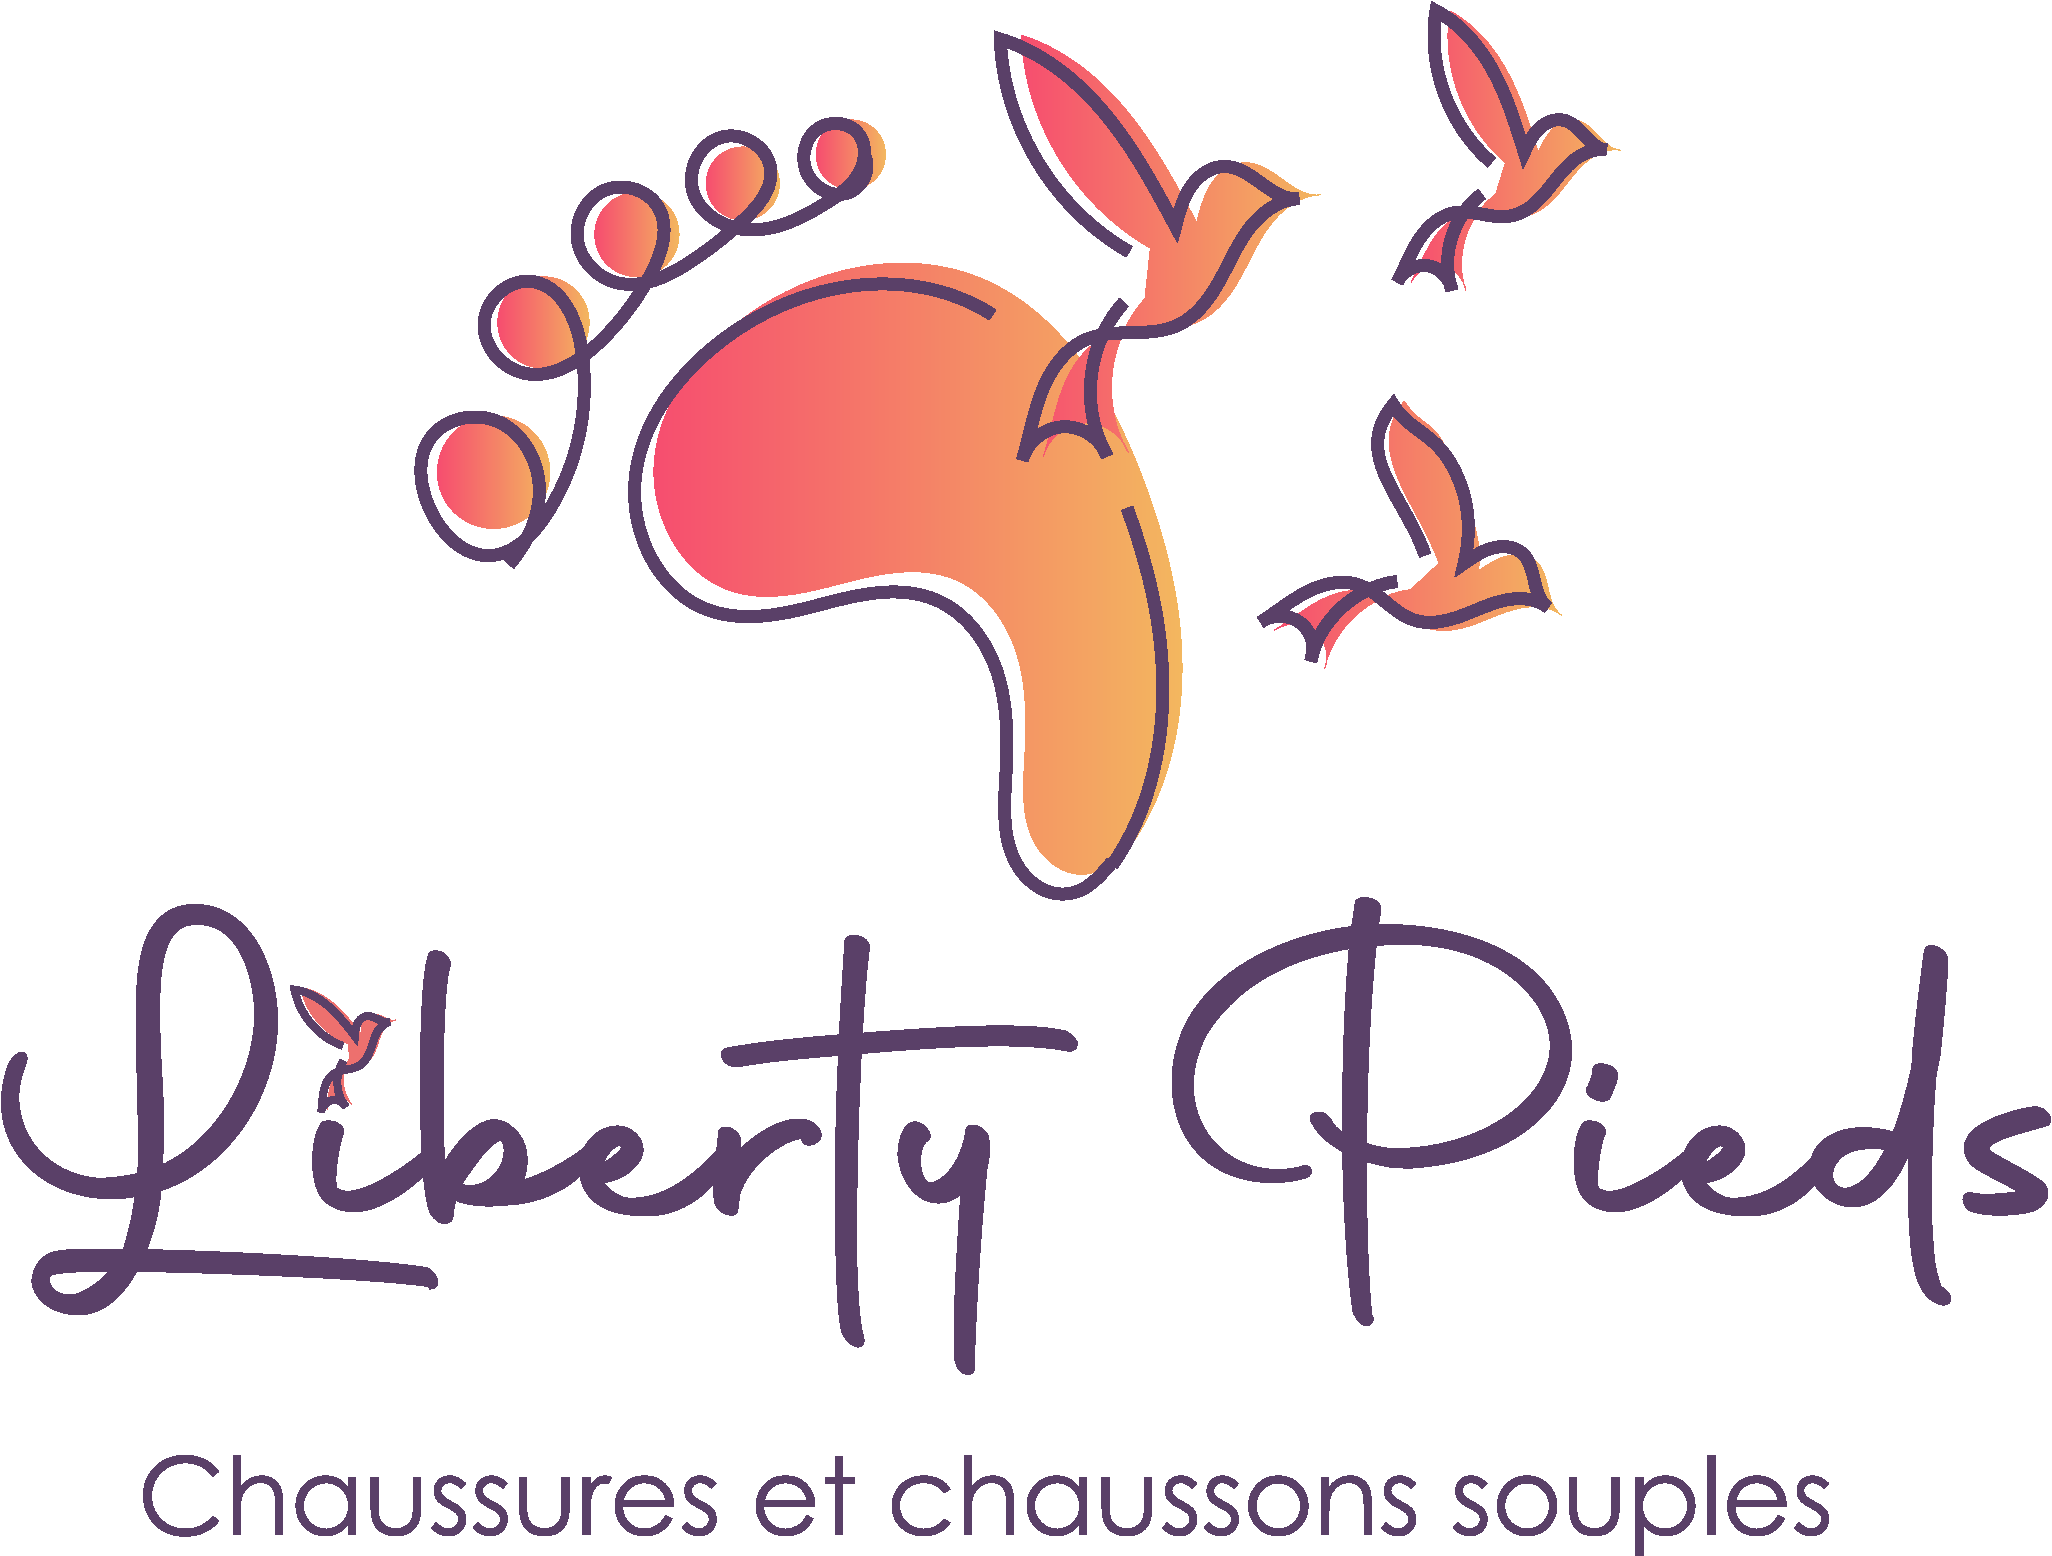 Liberty Pieds : chaussures et chaussons souples / barefoot